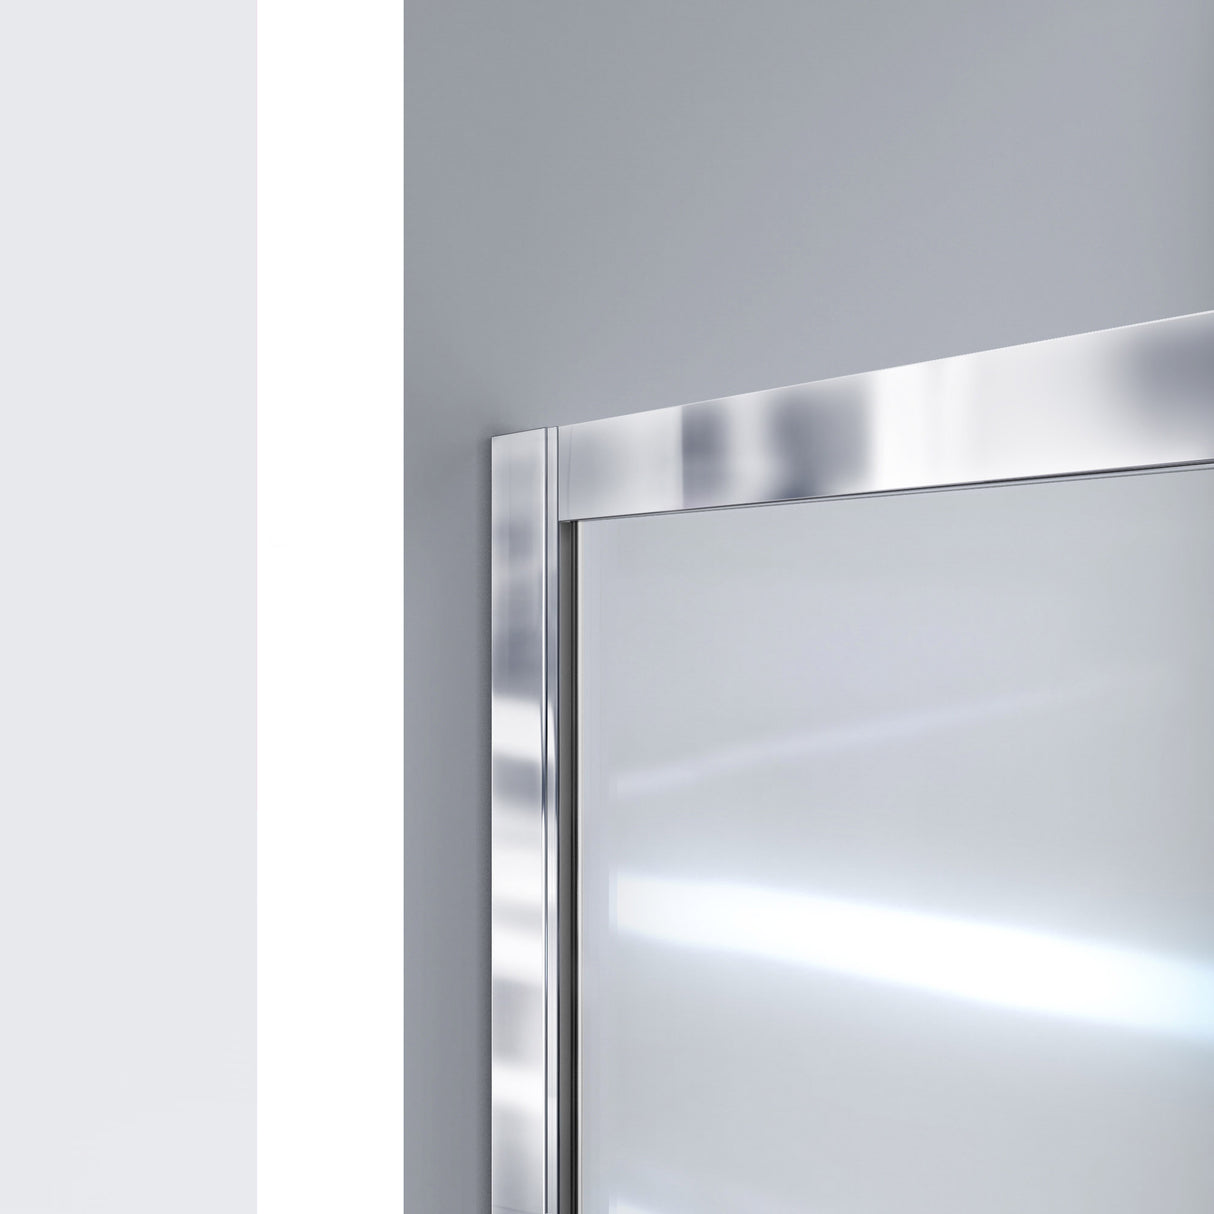 DreamLine Infinity-Z 36 in. D x 60 in. W x 74 3/4 in. H Frosted Sliding Shower Door in Chrome and Right Drain Black Base